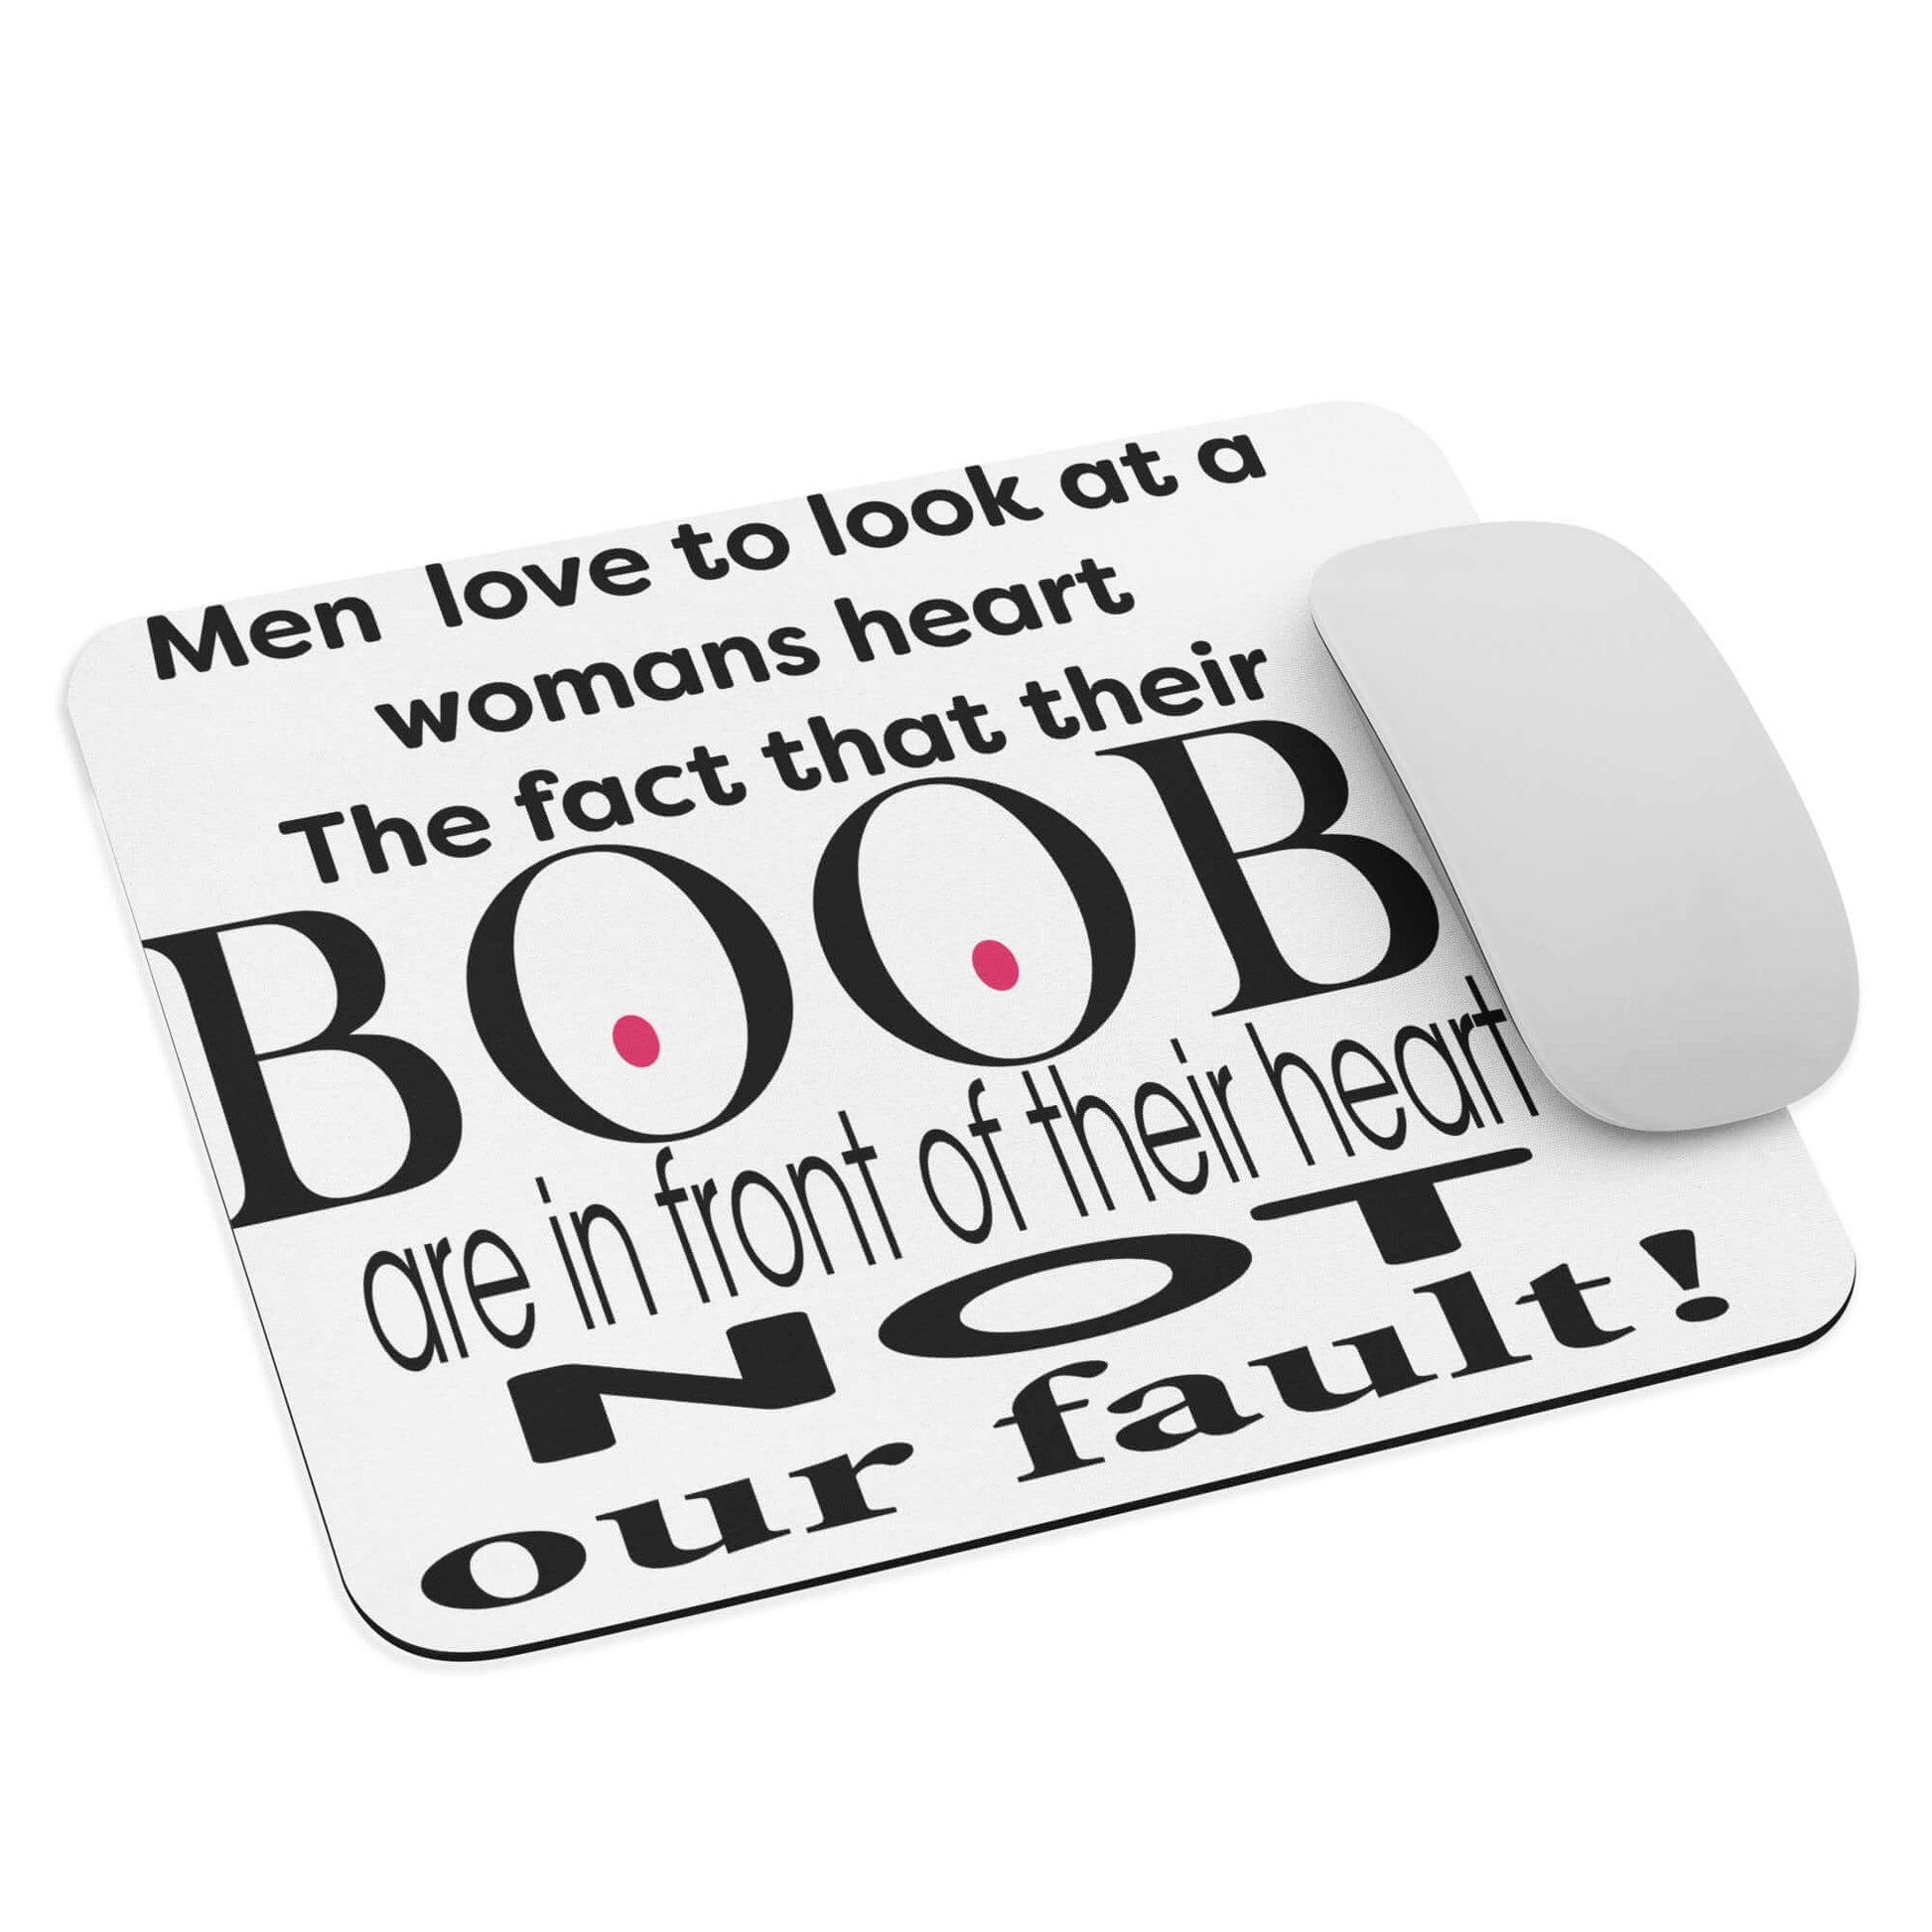 Men love to look at a womans heart. The fact that their BOOBS are in the way is not our fault - Mouse pad - Horrible Designs